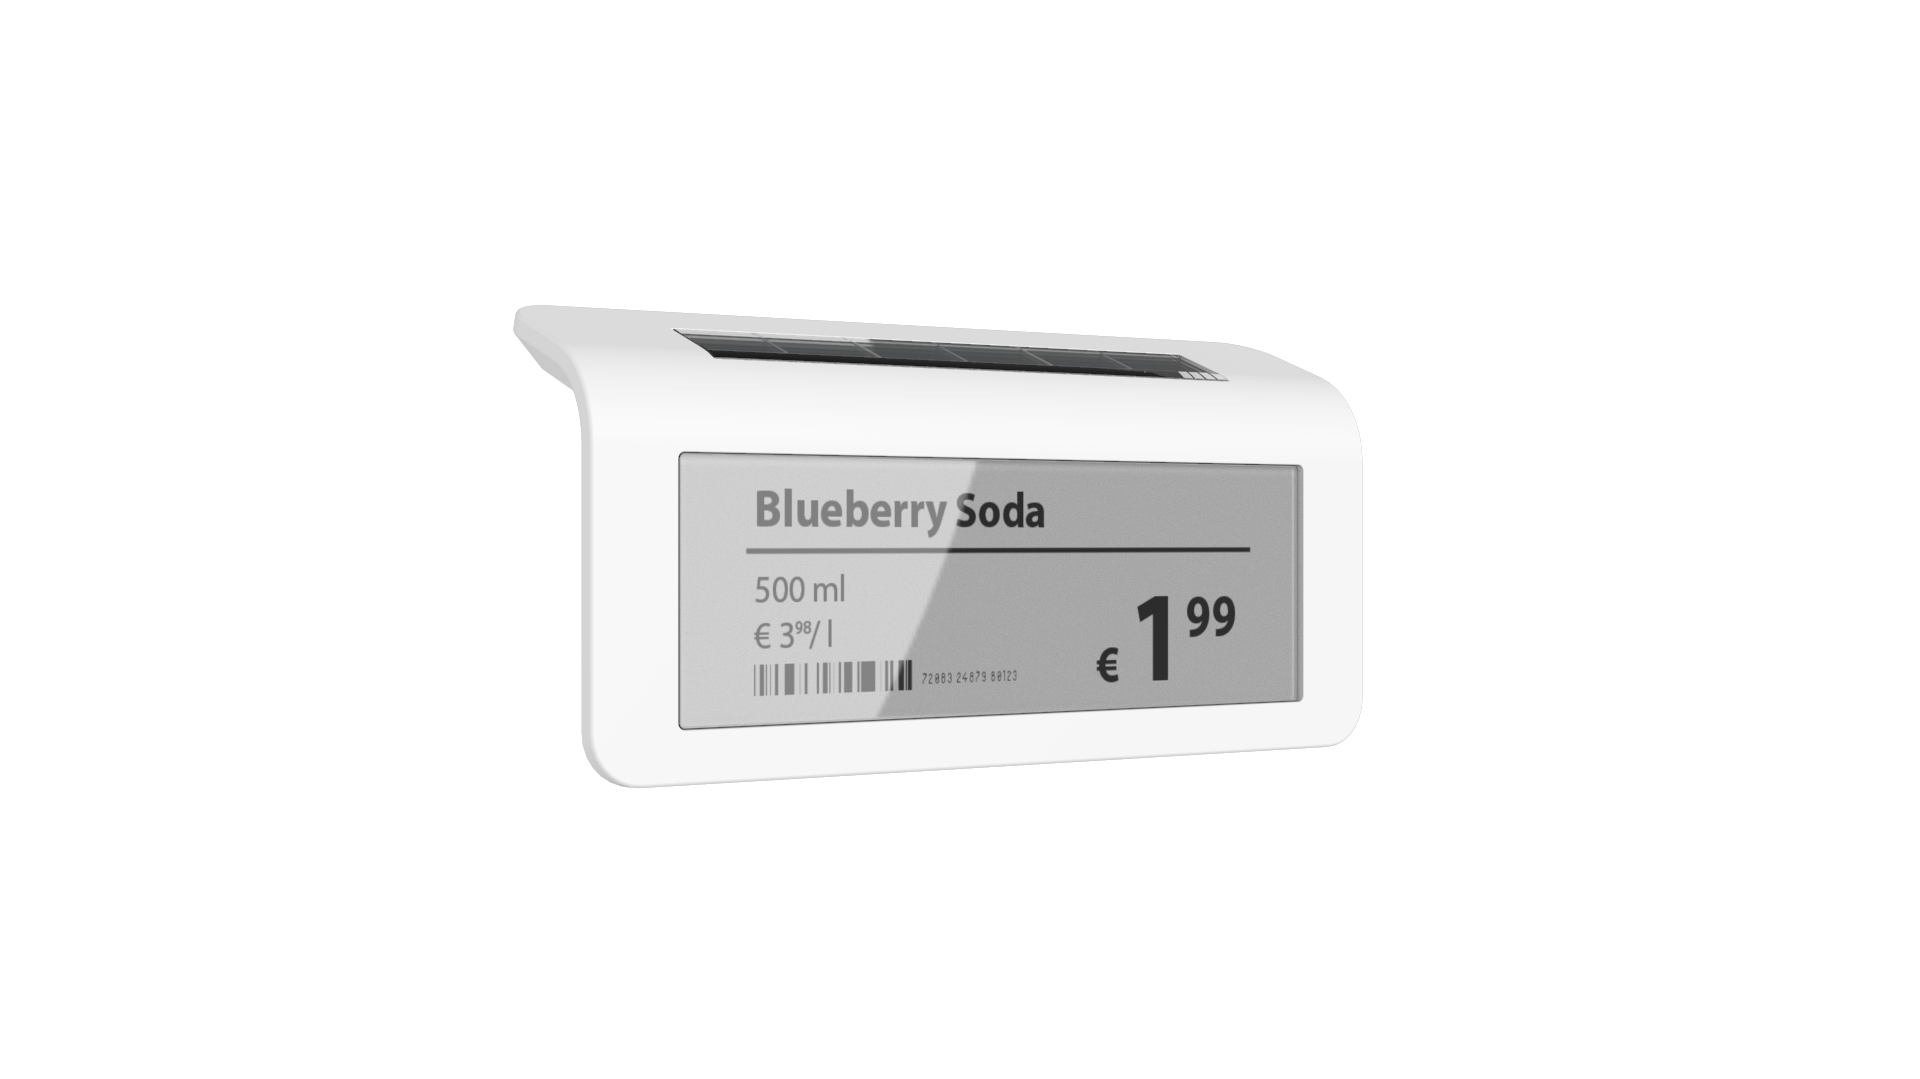 Electronic Shelf Label powered by light